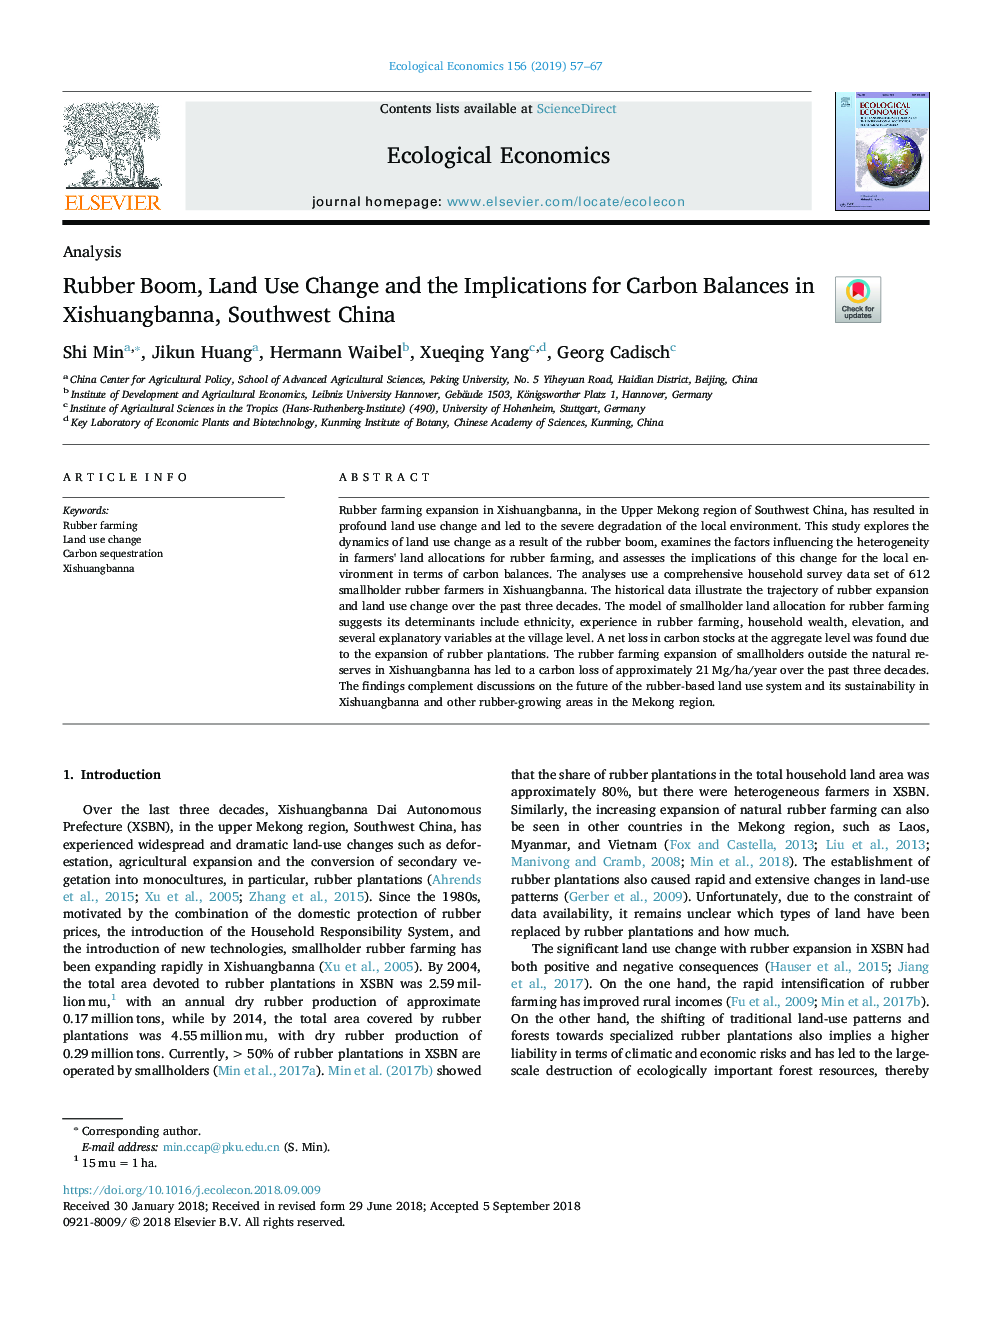 Rubber Boom, Land Use Change and the Implications for Carbon Balances in Xishuangbanna, Southwest China